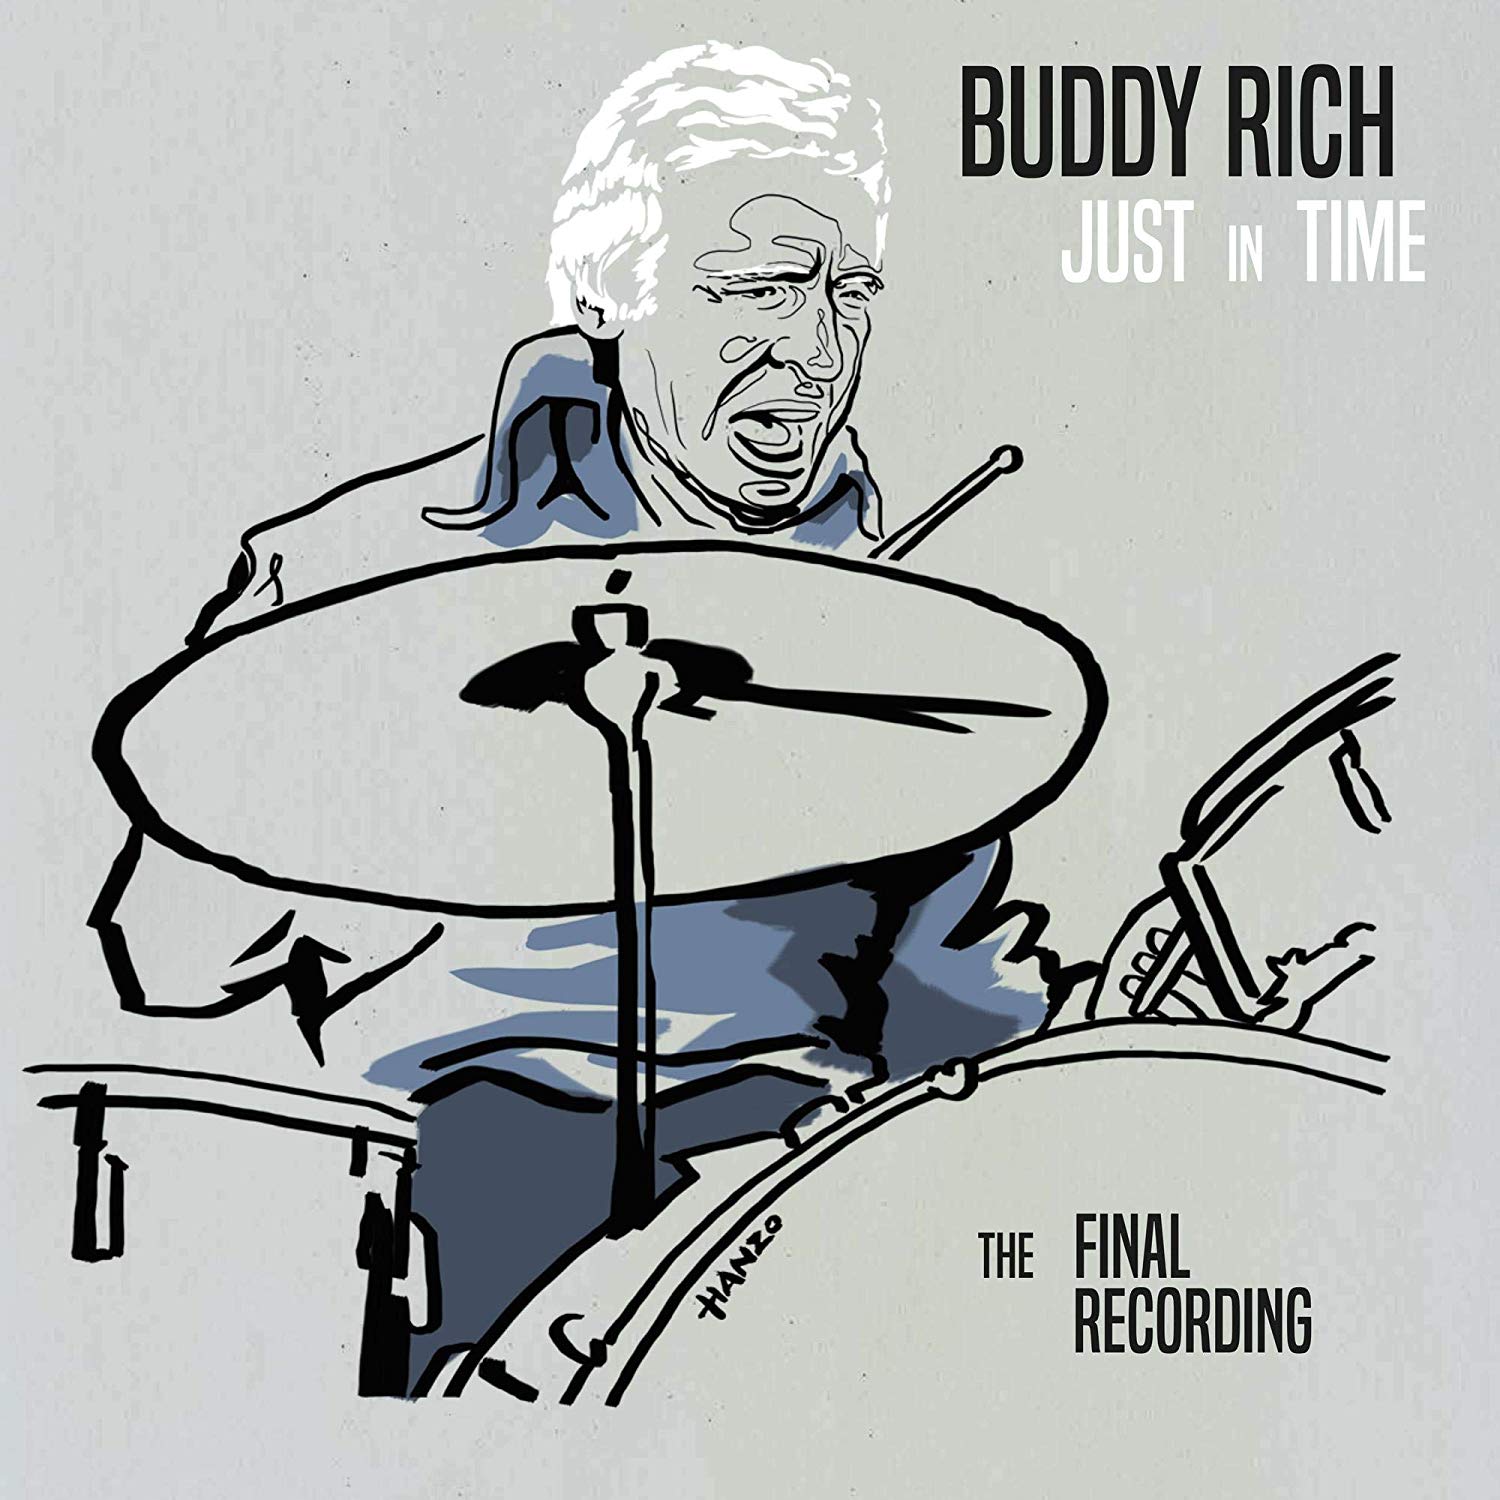 Buddy Rich - Just In Time - The Final Recording [3-lp]